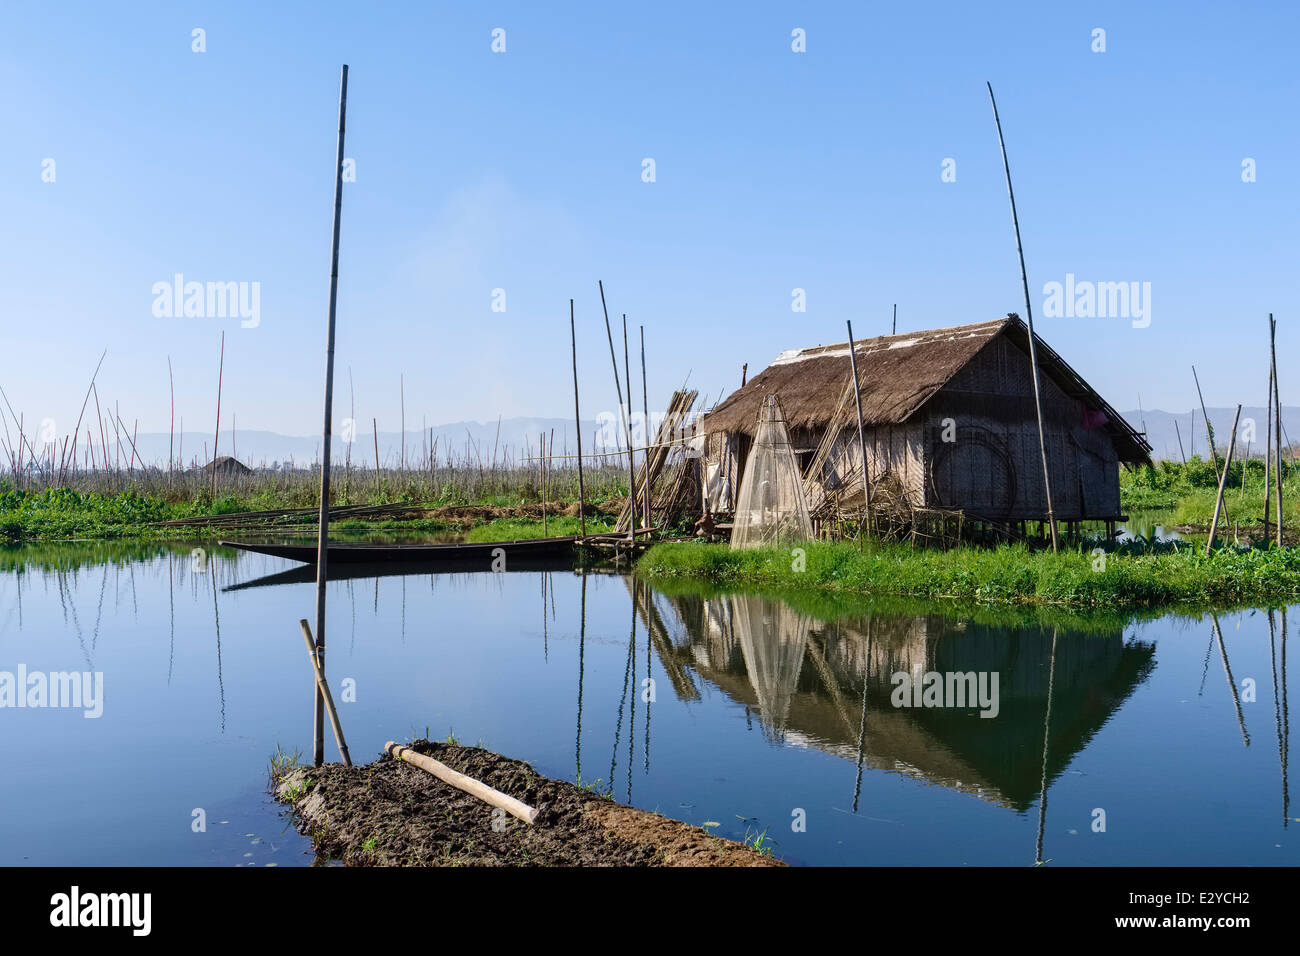 Thatched hut in Floating gardens, Inle Lake, Myanmar, Asia Stock Photo